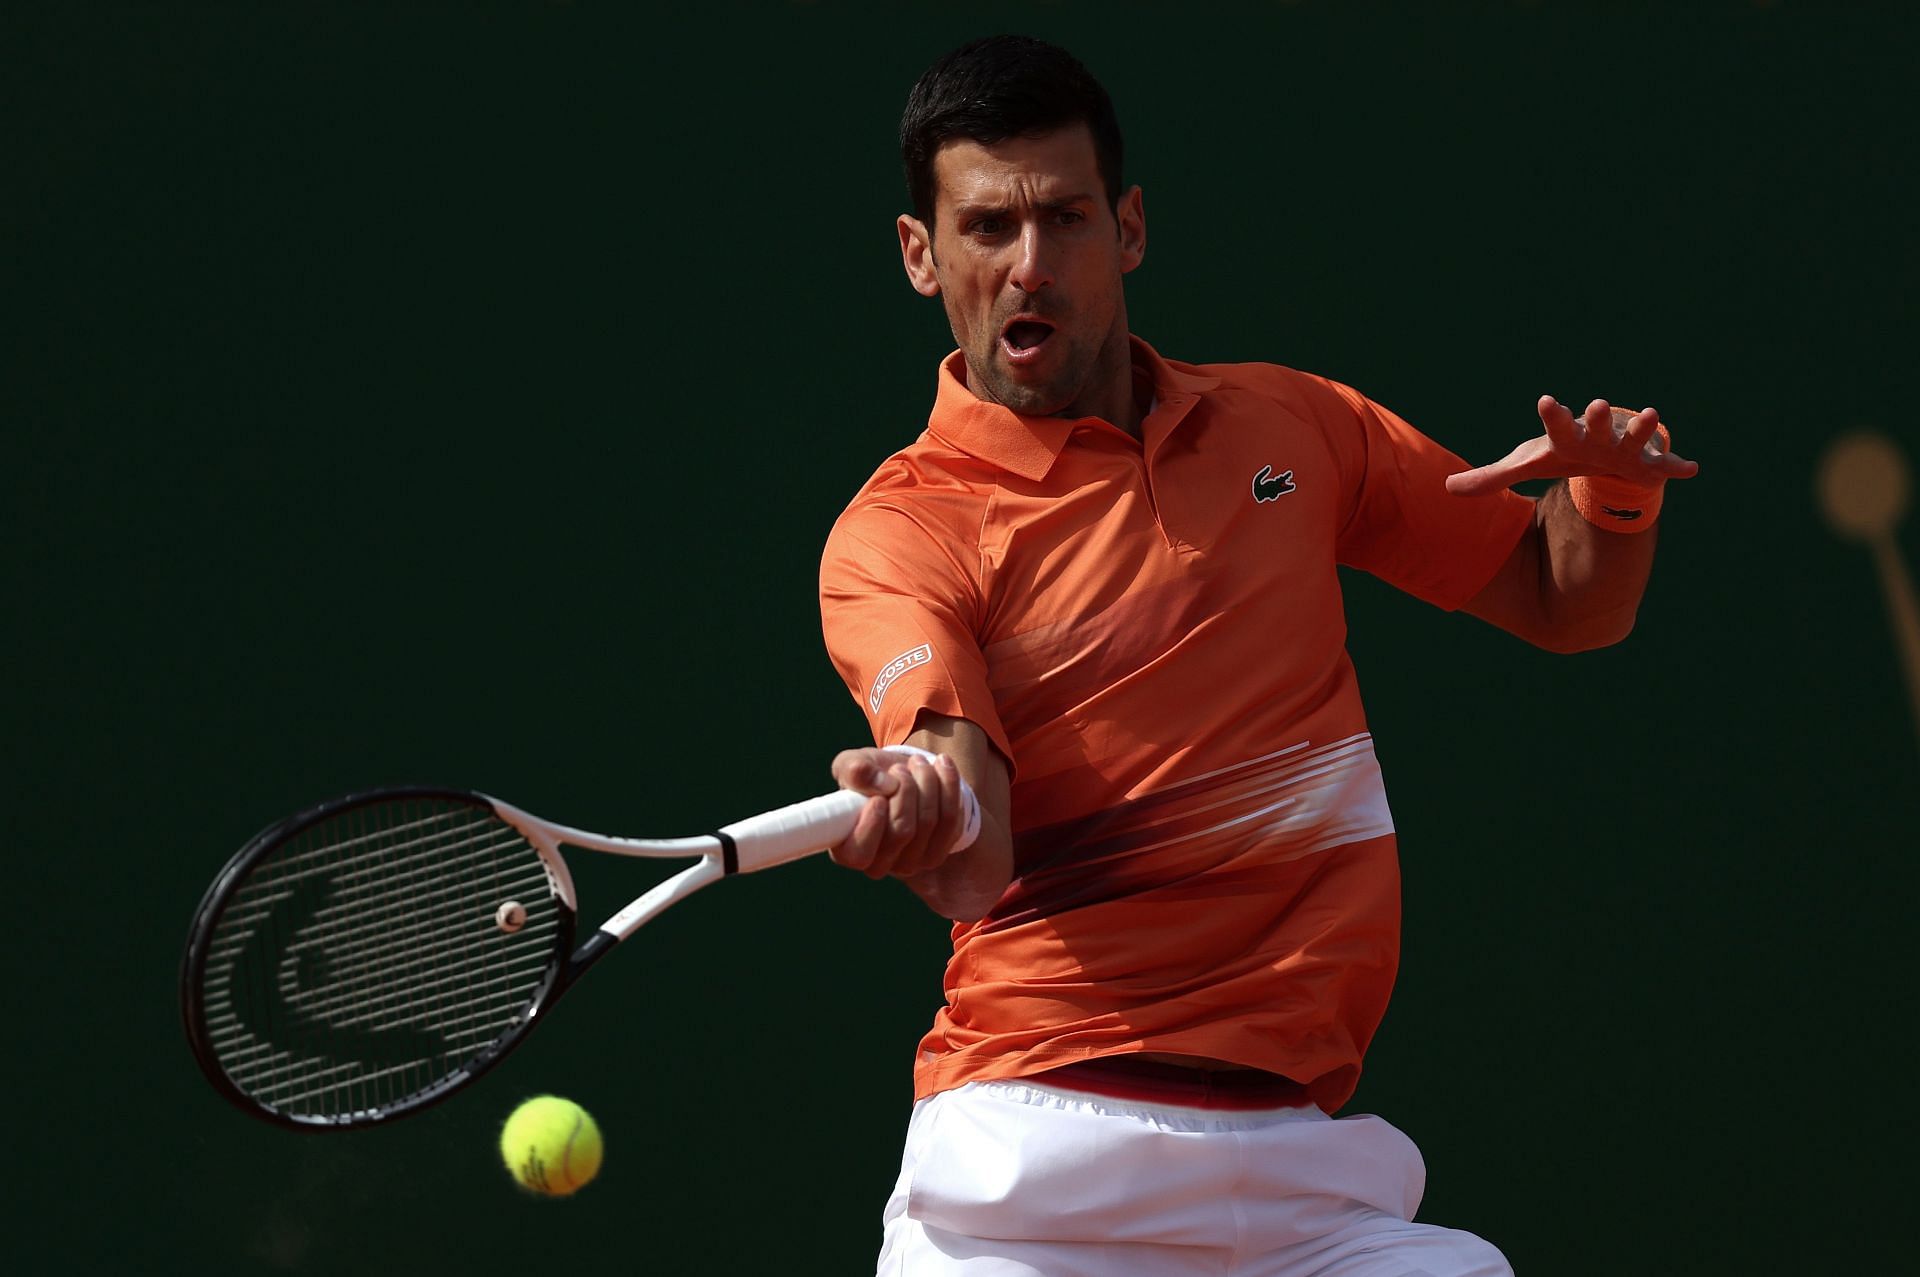 Novak Djokovic is the top seed at the Serbia Open